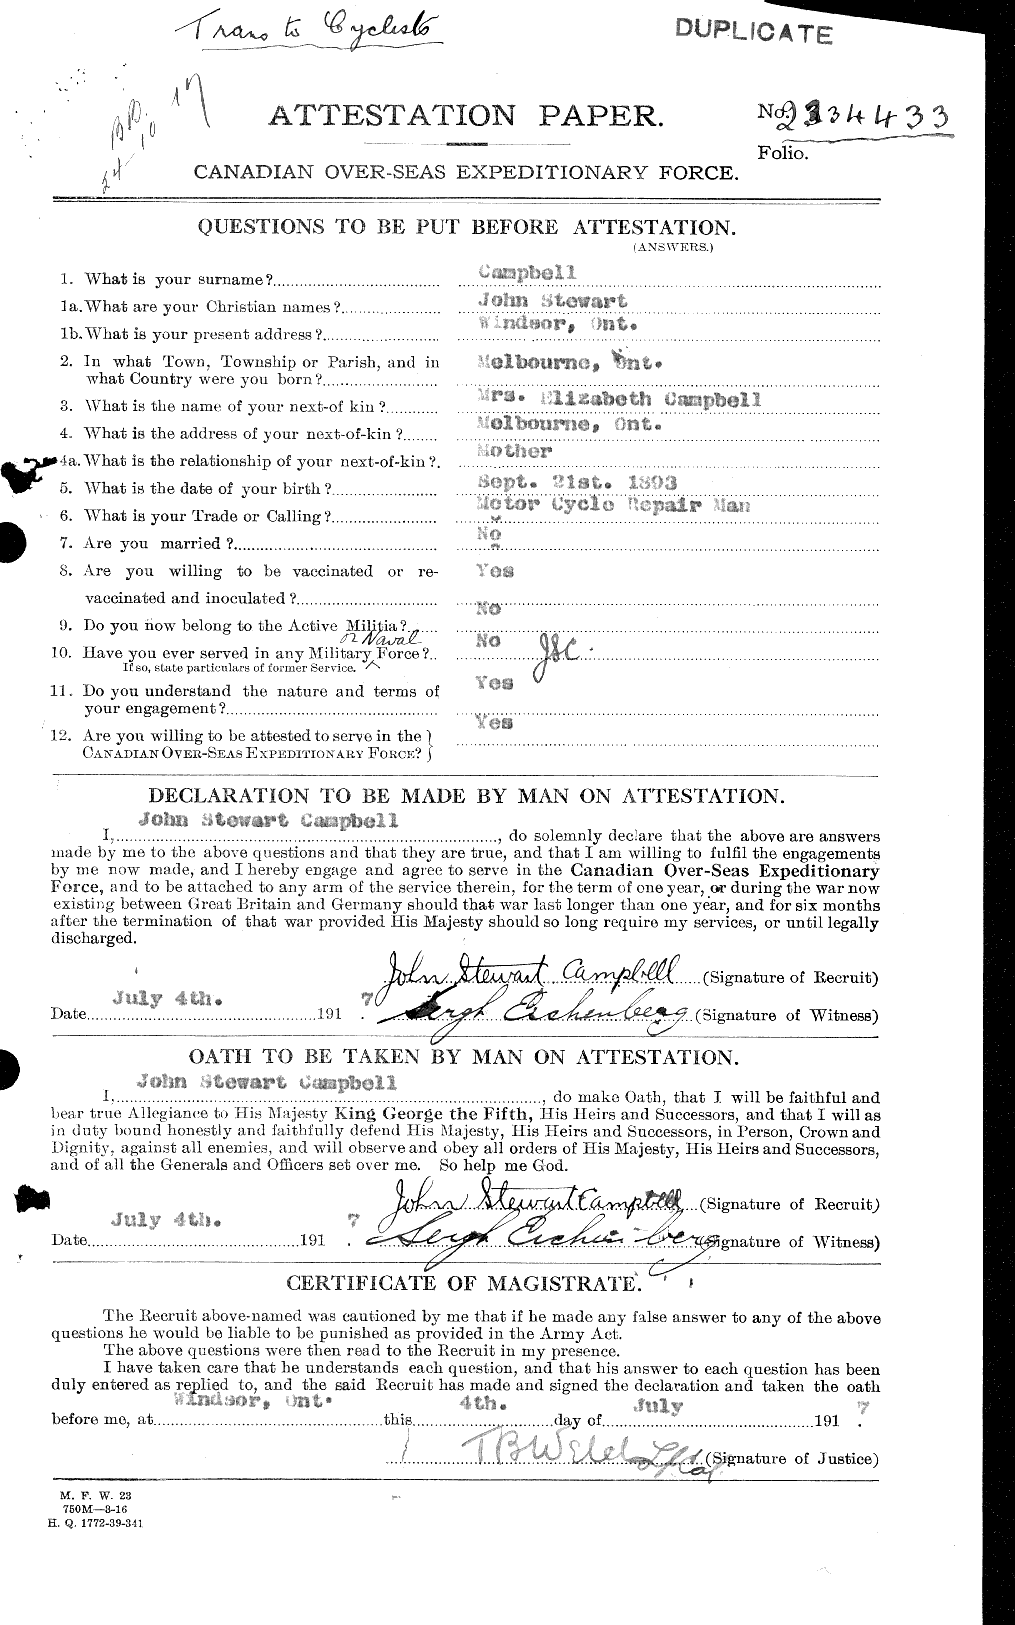 Personnel Records of the First World War - CEF 003794a